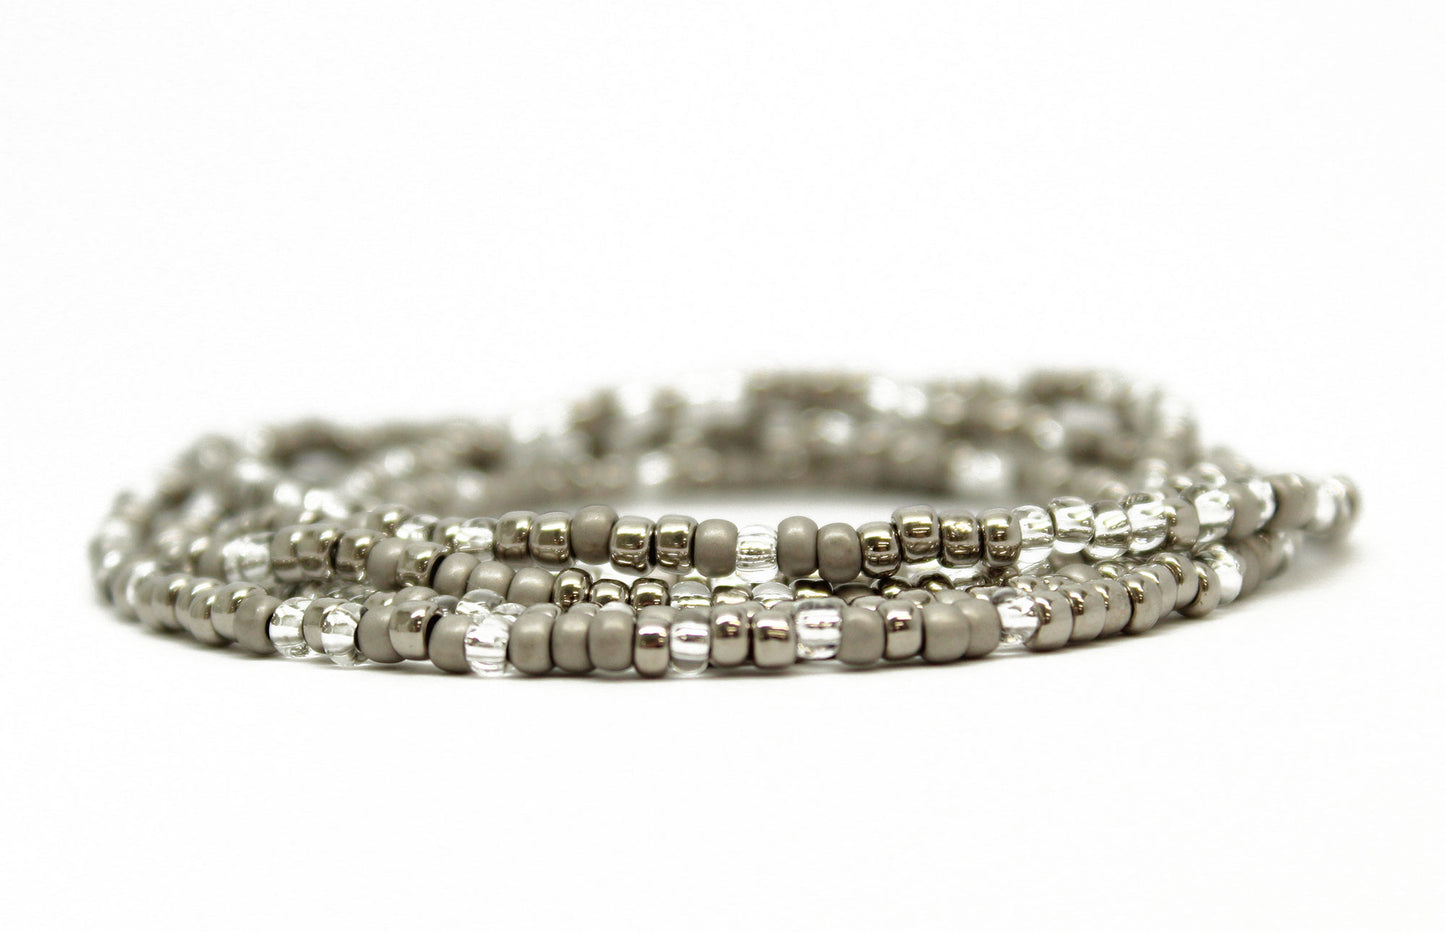 Silver and grey seed bead necklace